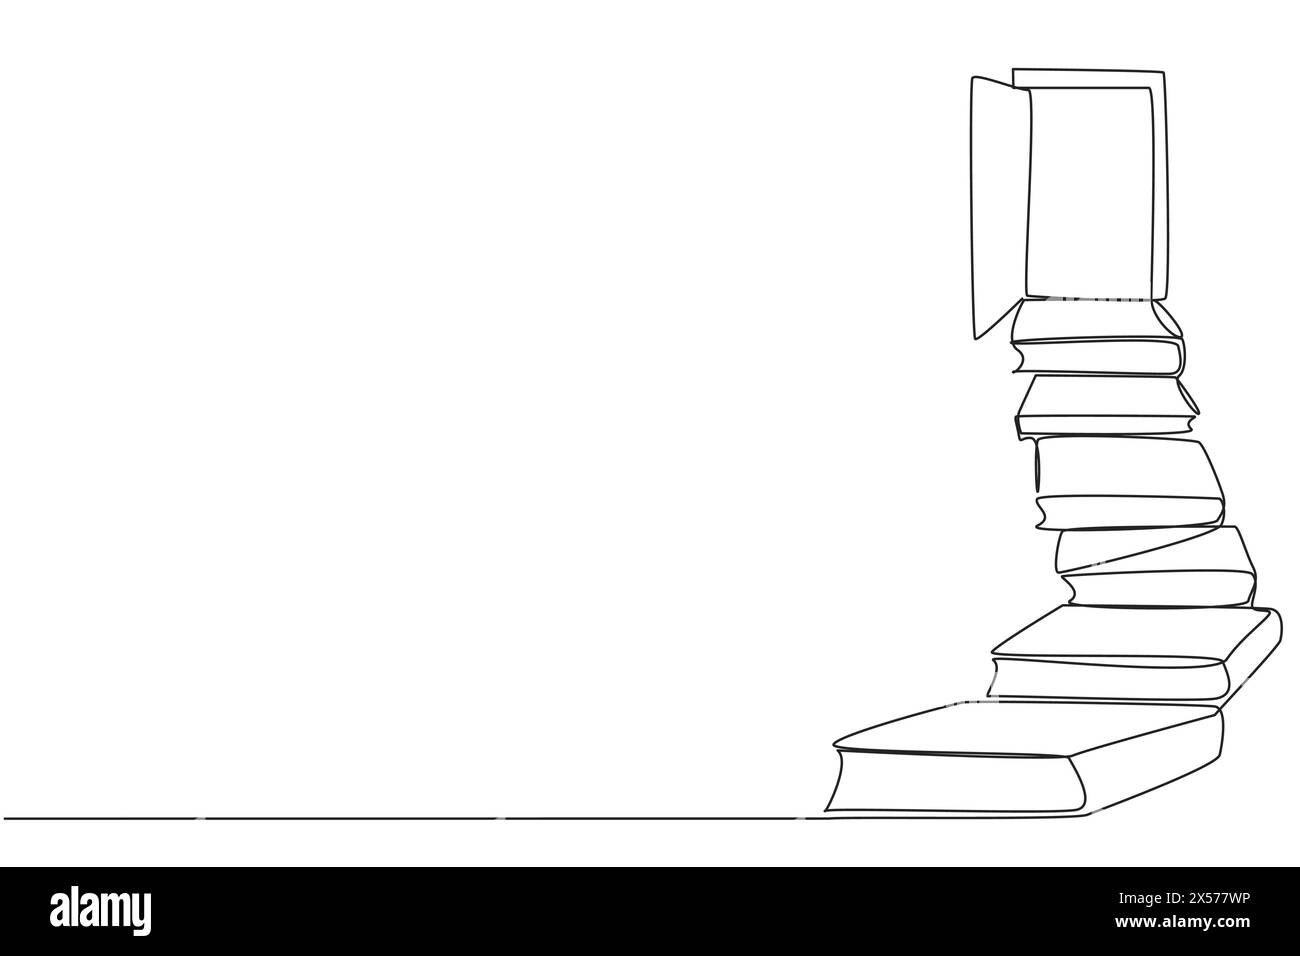 Single continuous line drawing stack the books used as steps. Reach for the open door at the end of the stairs. Symbol of achieving desires. Book fest Stock Vector